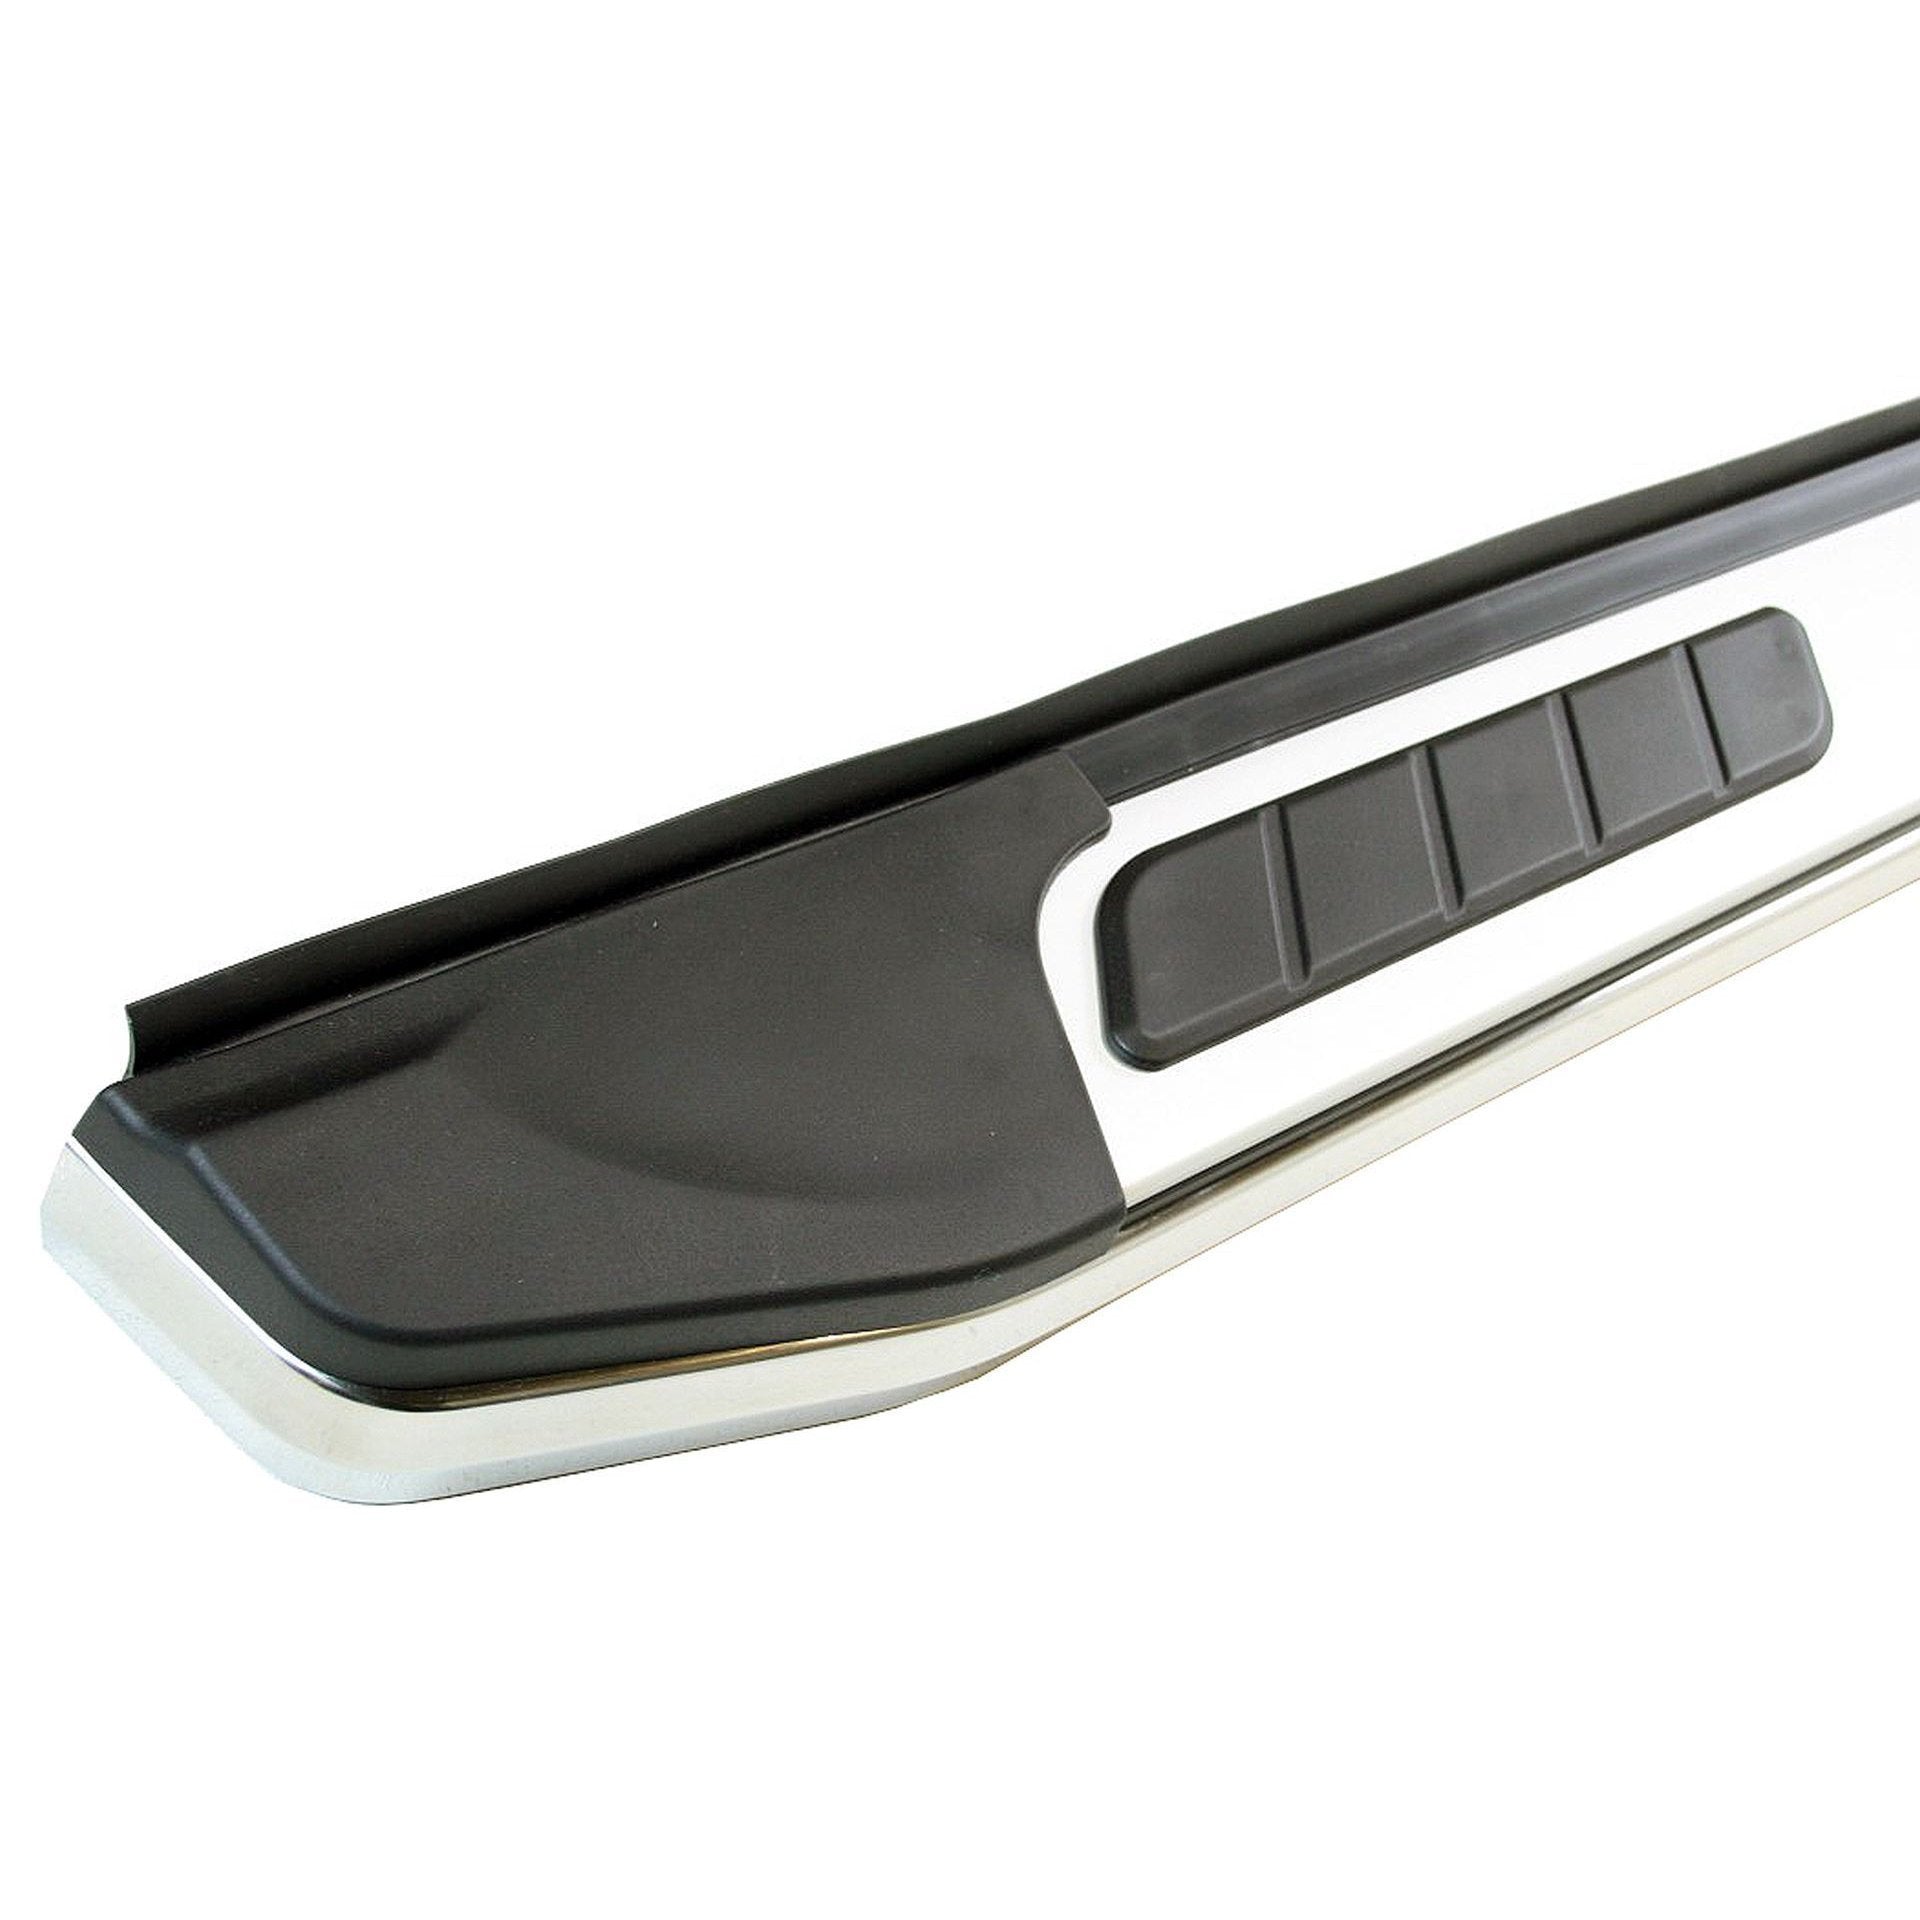 Suburban Side Steps Running Boards for MG HS -  - sold by Direct4x4